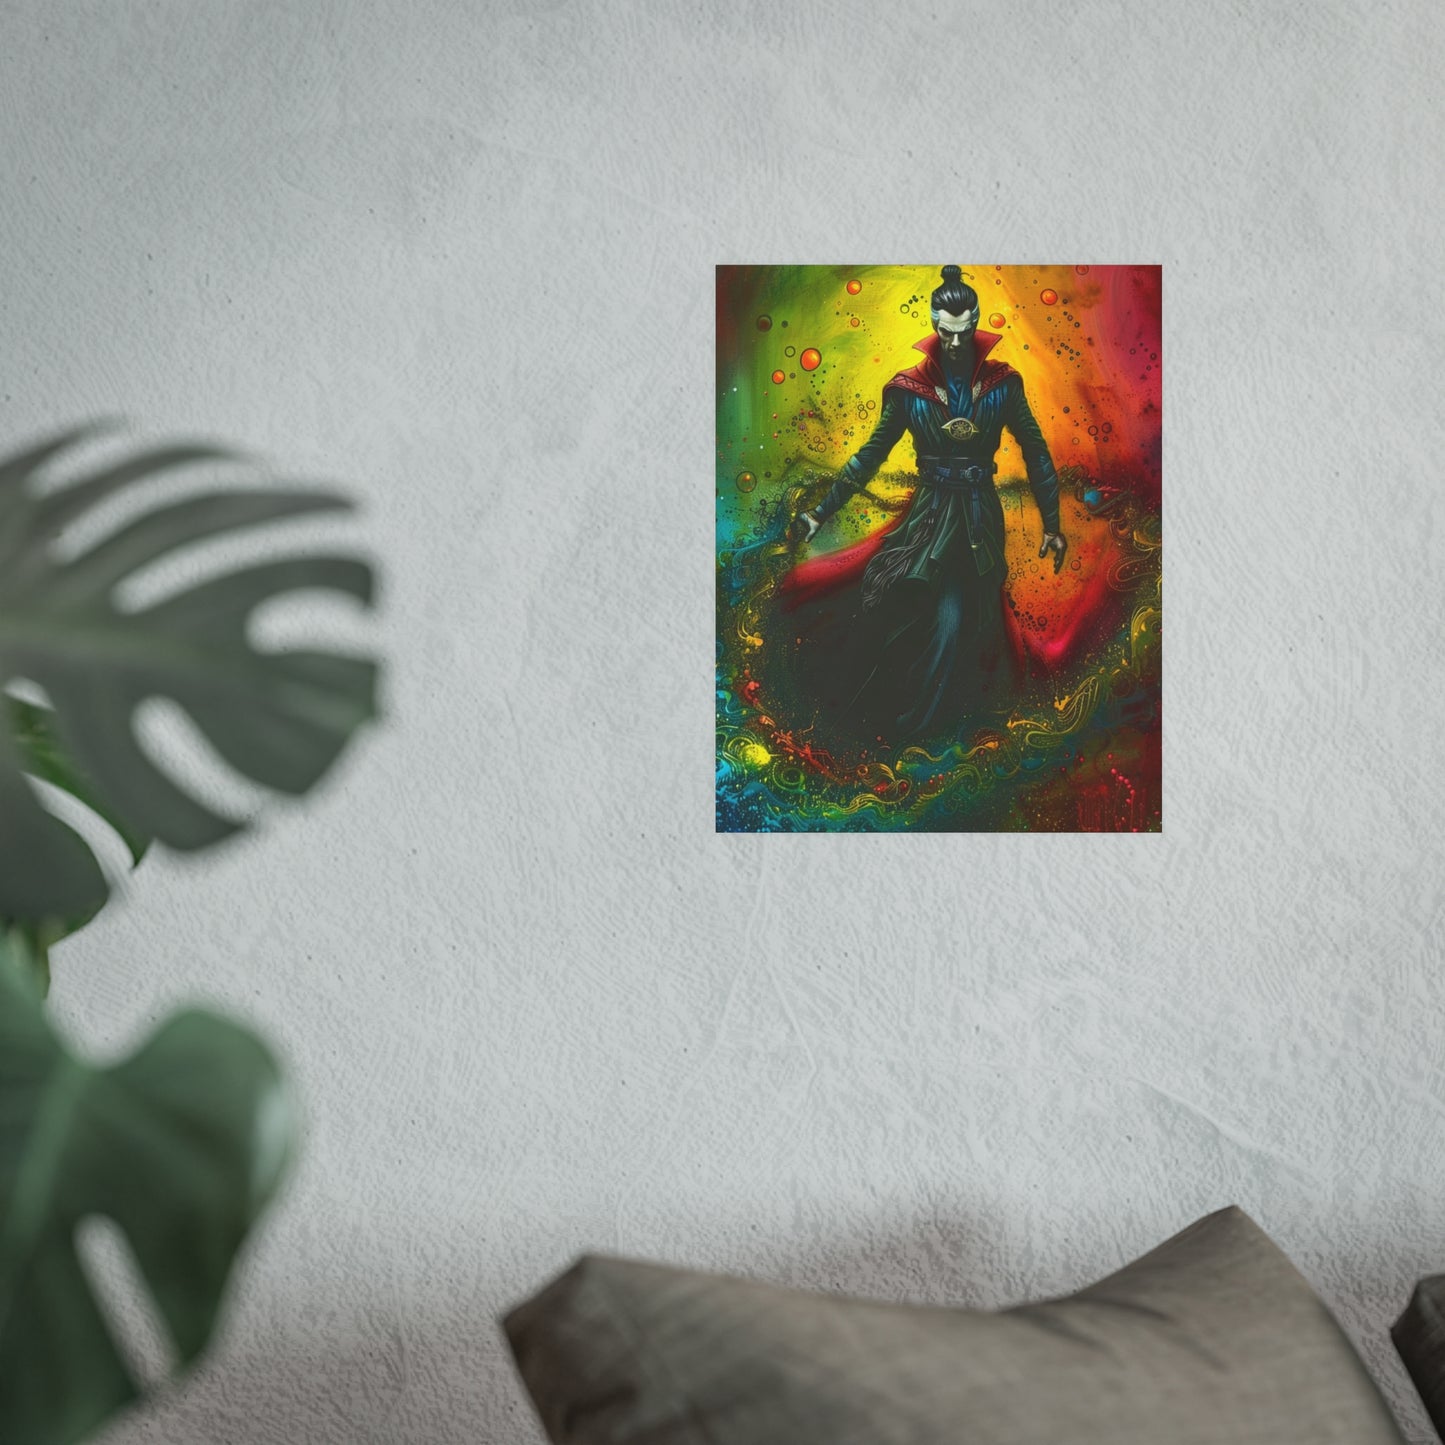 Satin and Archival Matte Posters: Doctor Strange (inspired by Marvel)